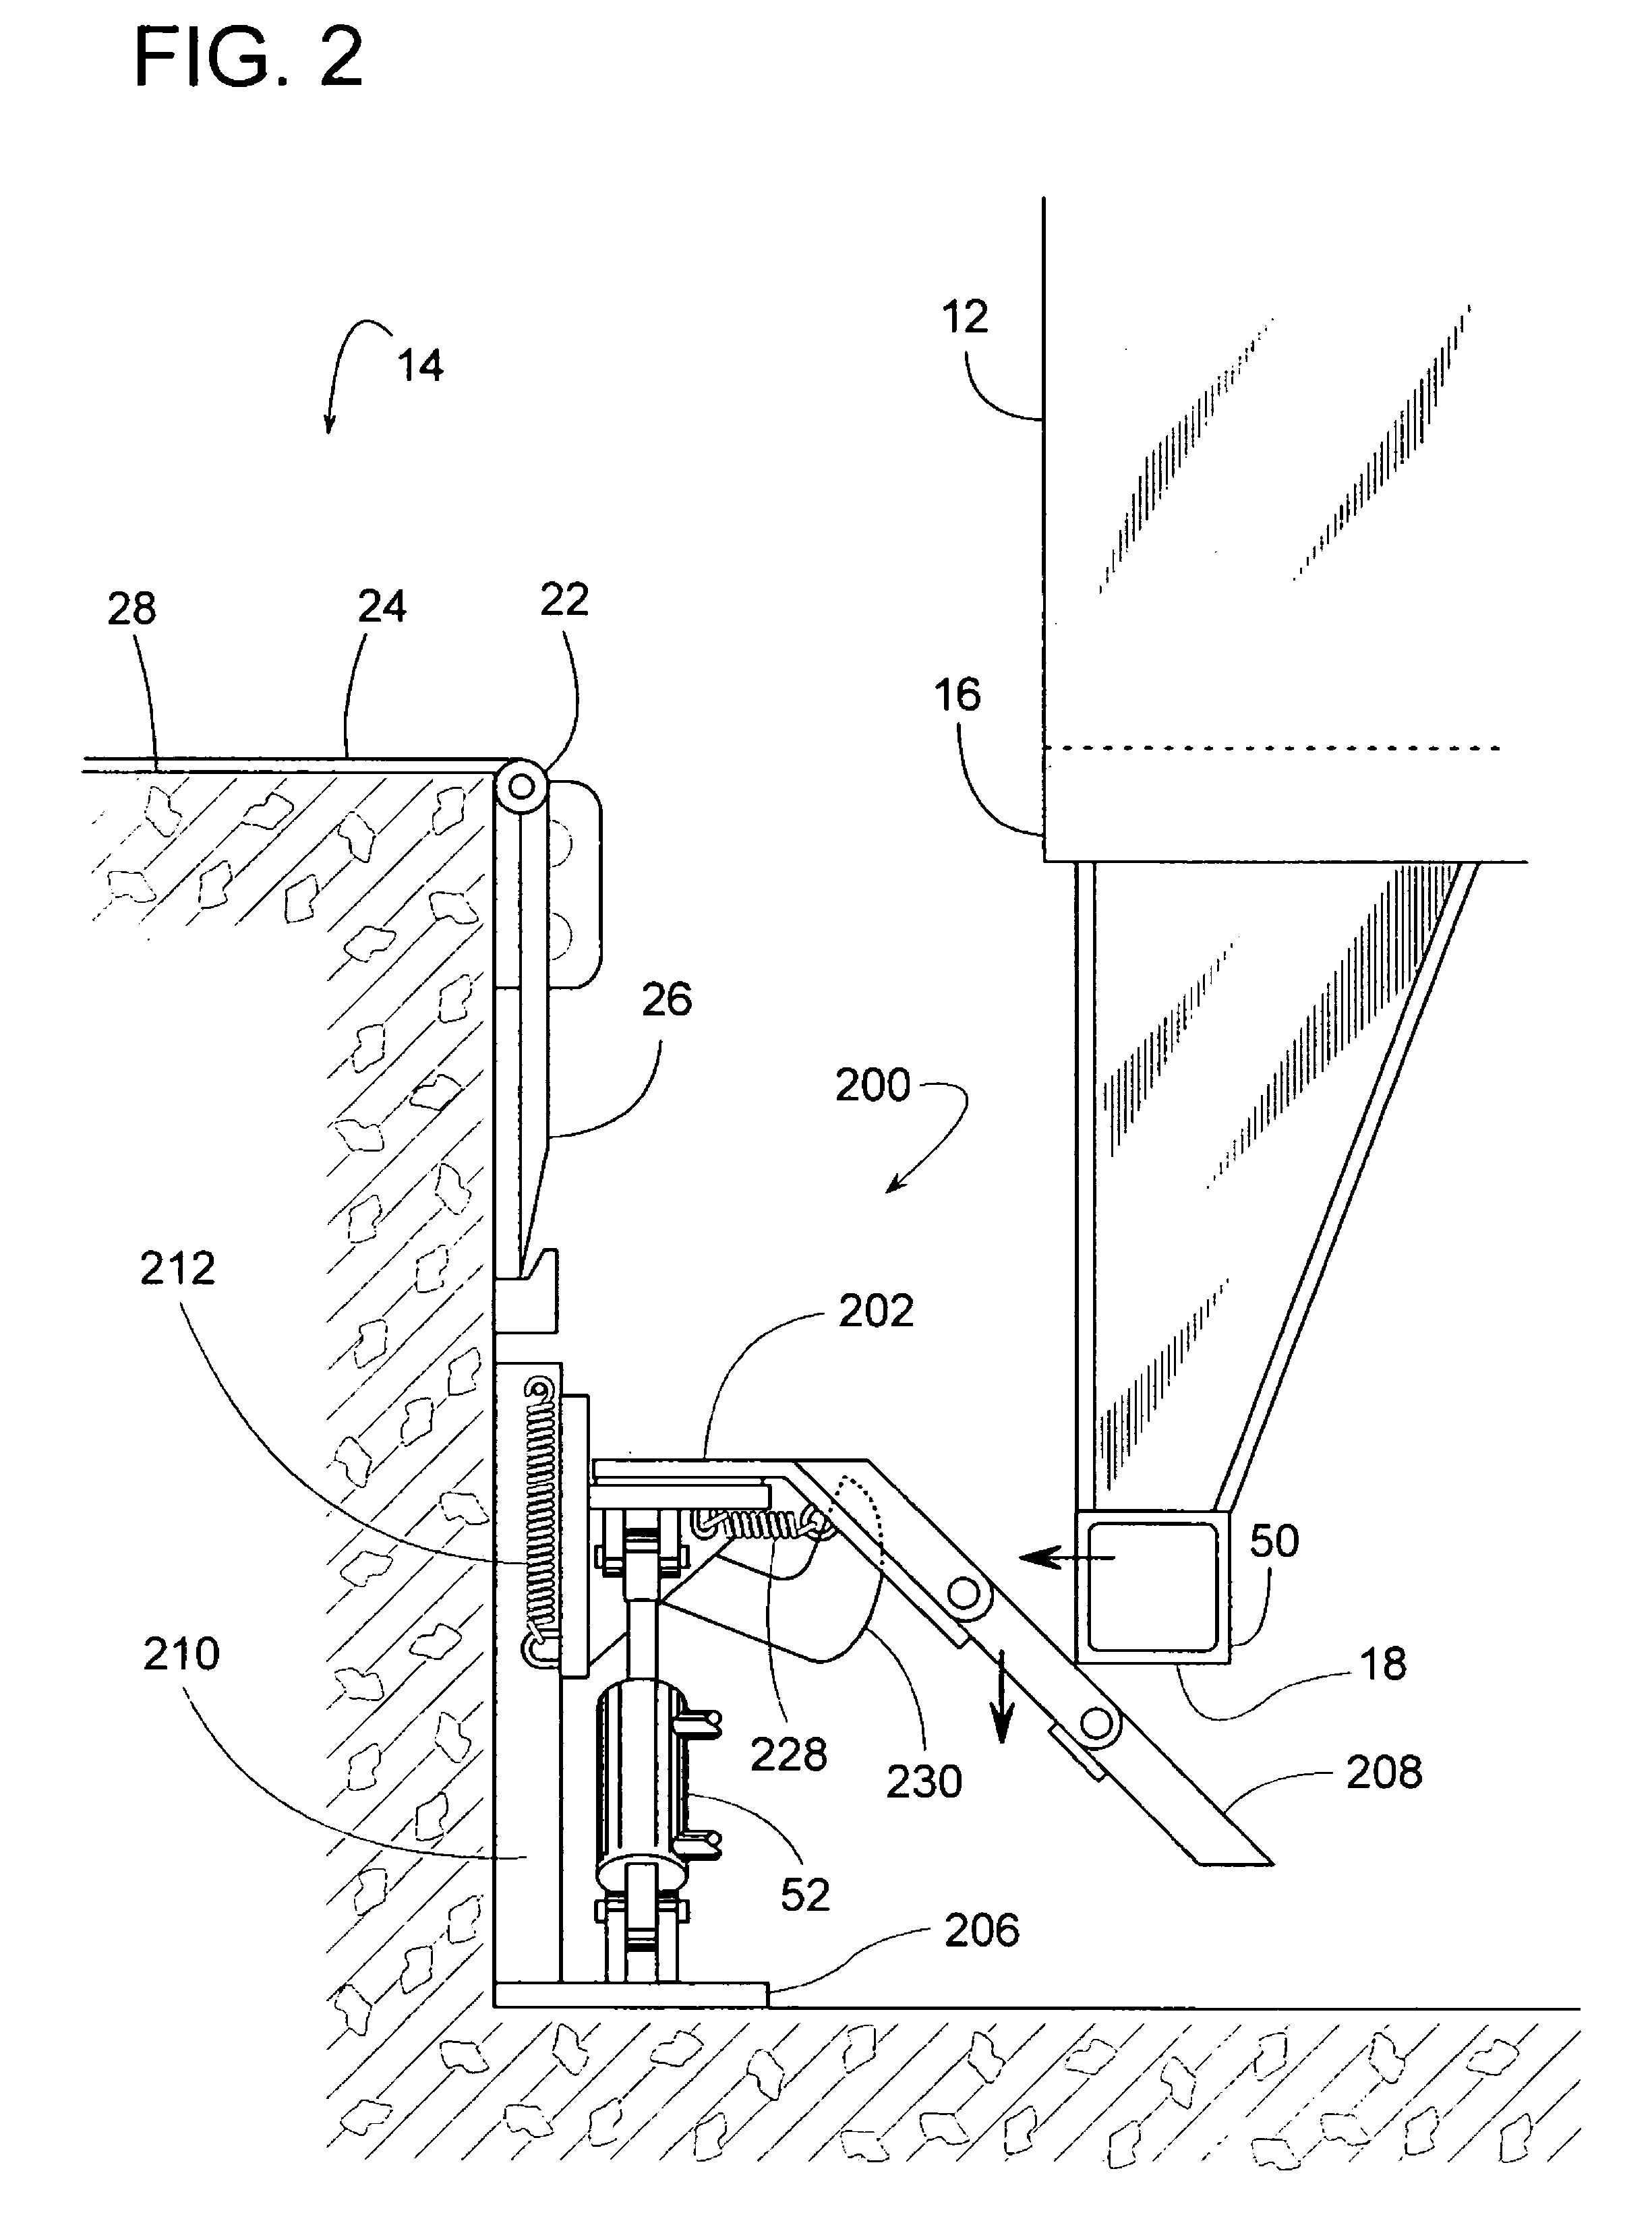 Brace system and method for a vehicle at a loading dock